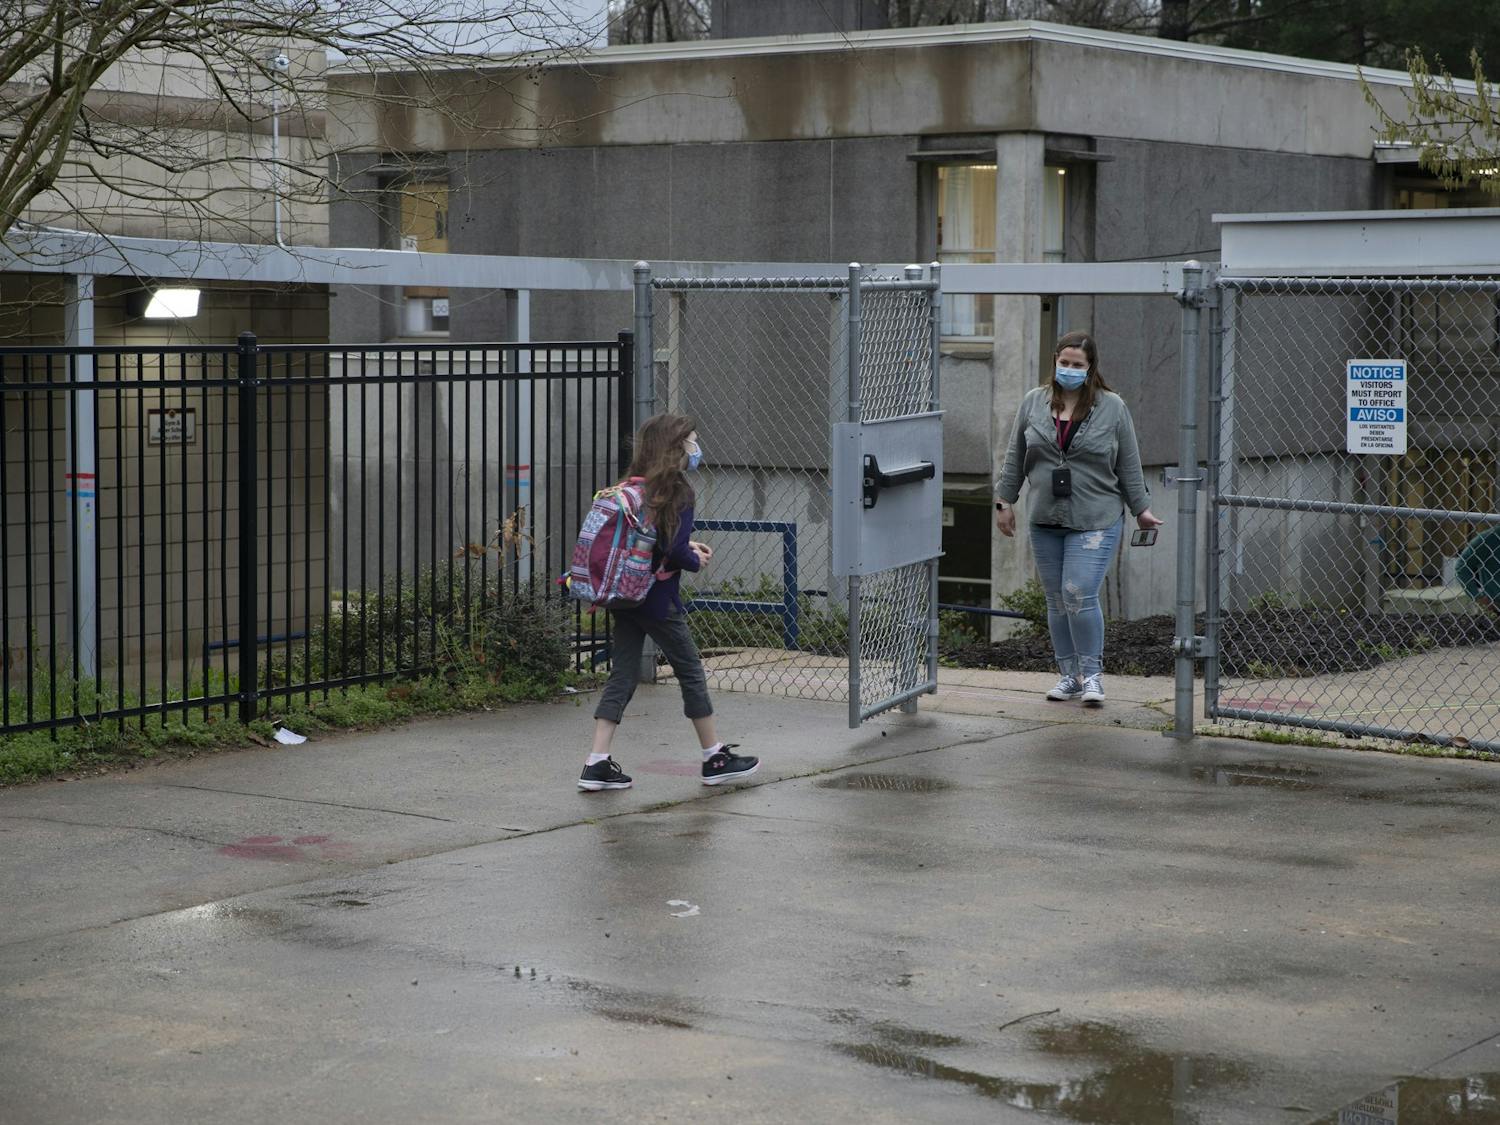 A student of Frank Porter Graham Elementary school walks from carpool toward the school early in the morning on March 26, 2021. CHCCS have recently reopened in-person instruction, although many children are still learning virtually.